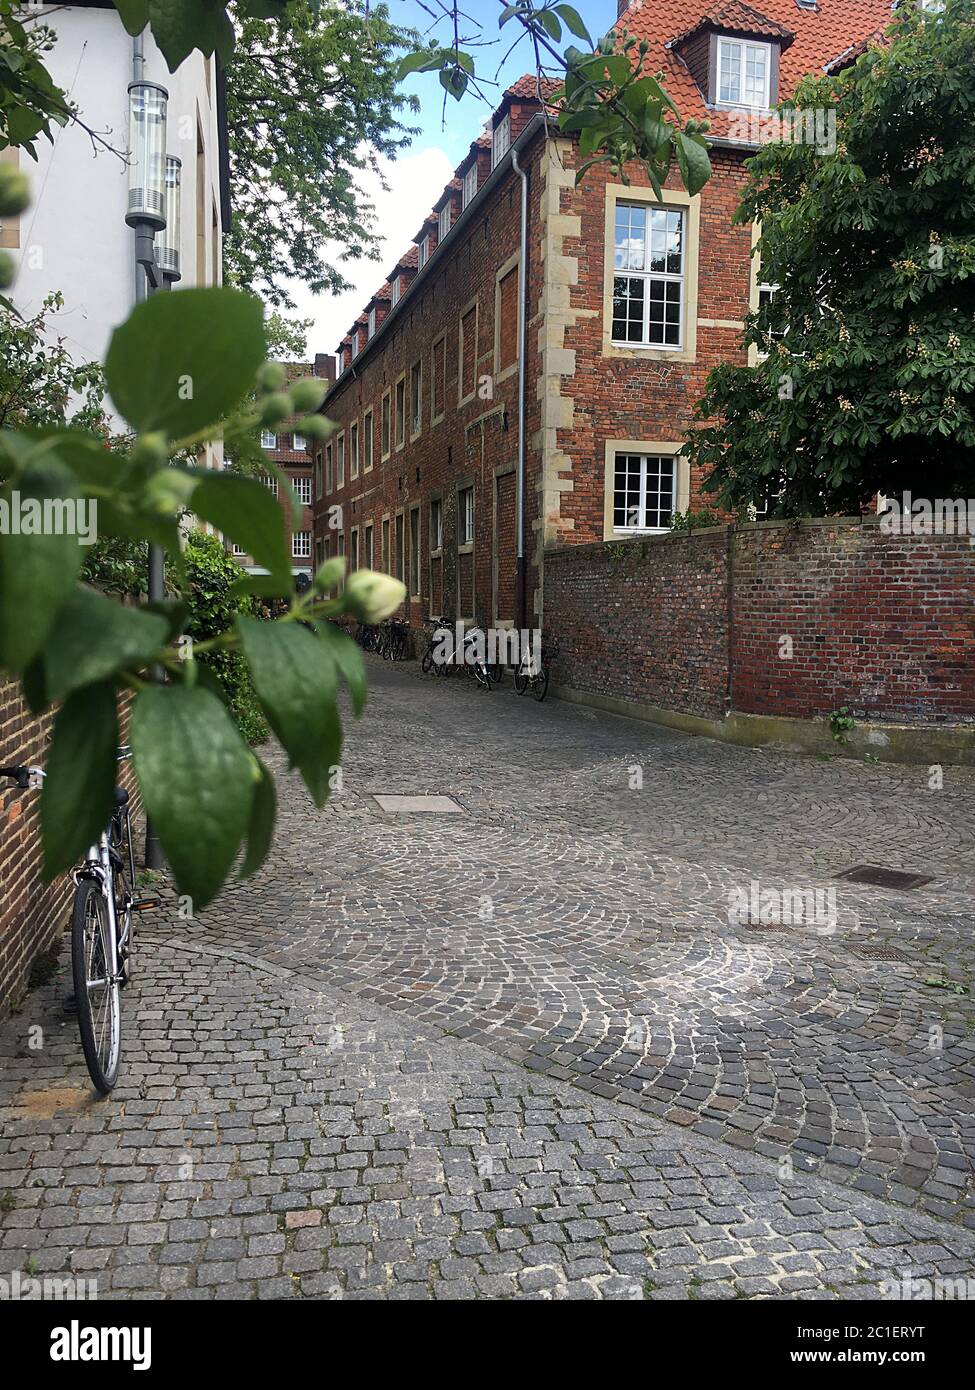 Cobblestone street in Muenster, Germany in spring with foliage. Stock Photo